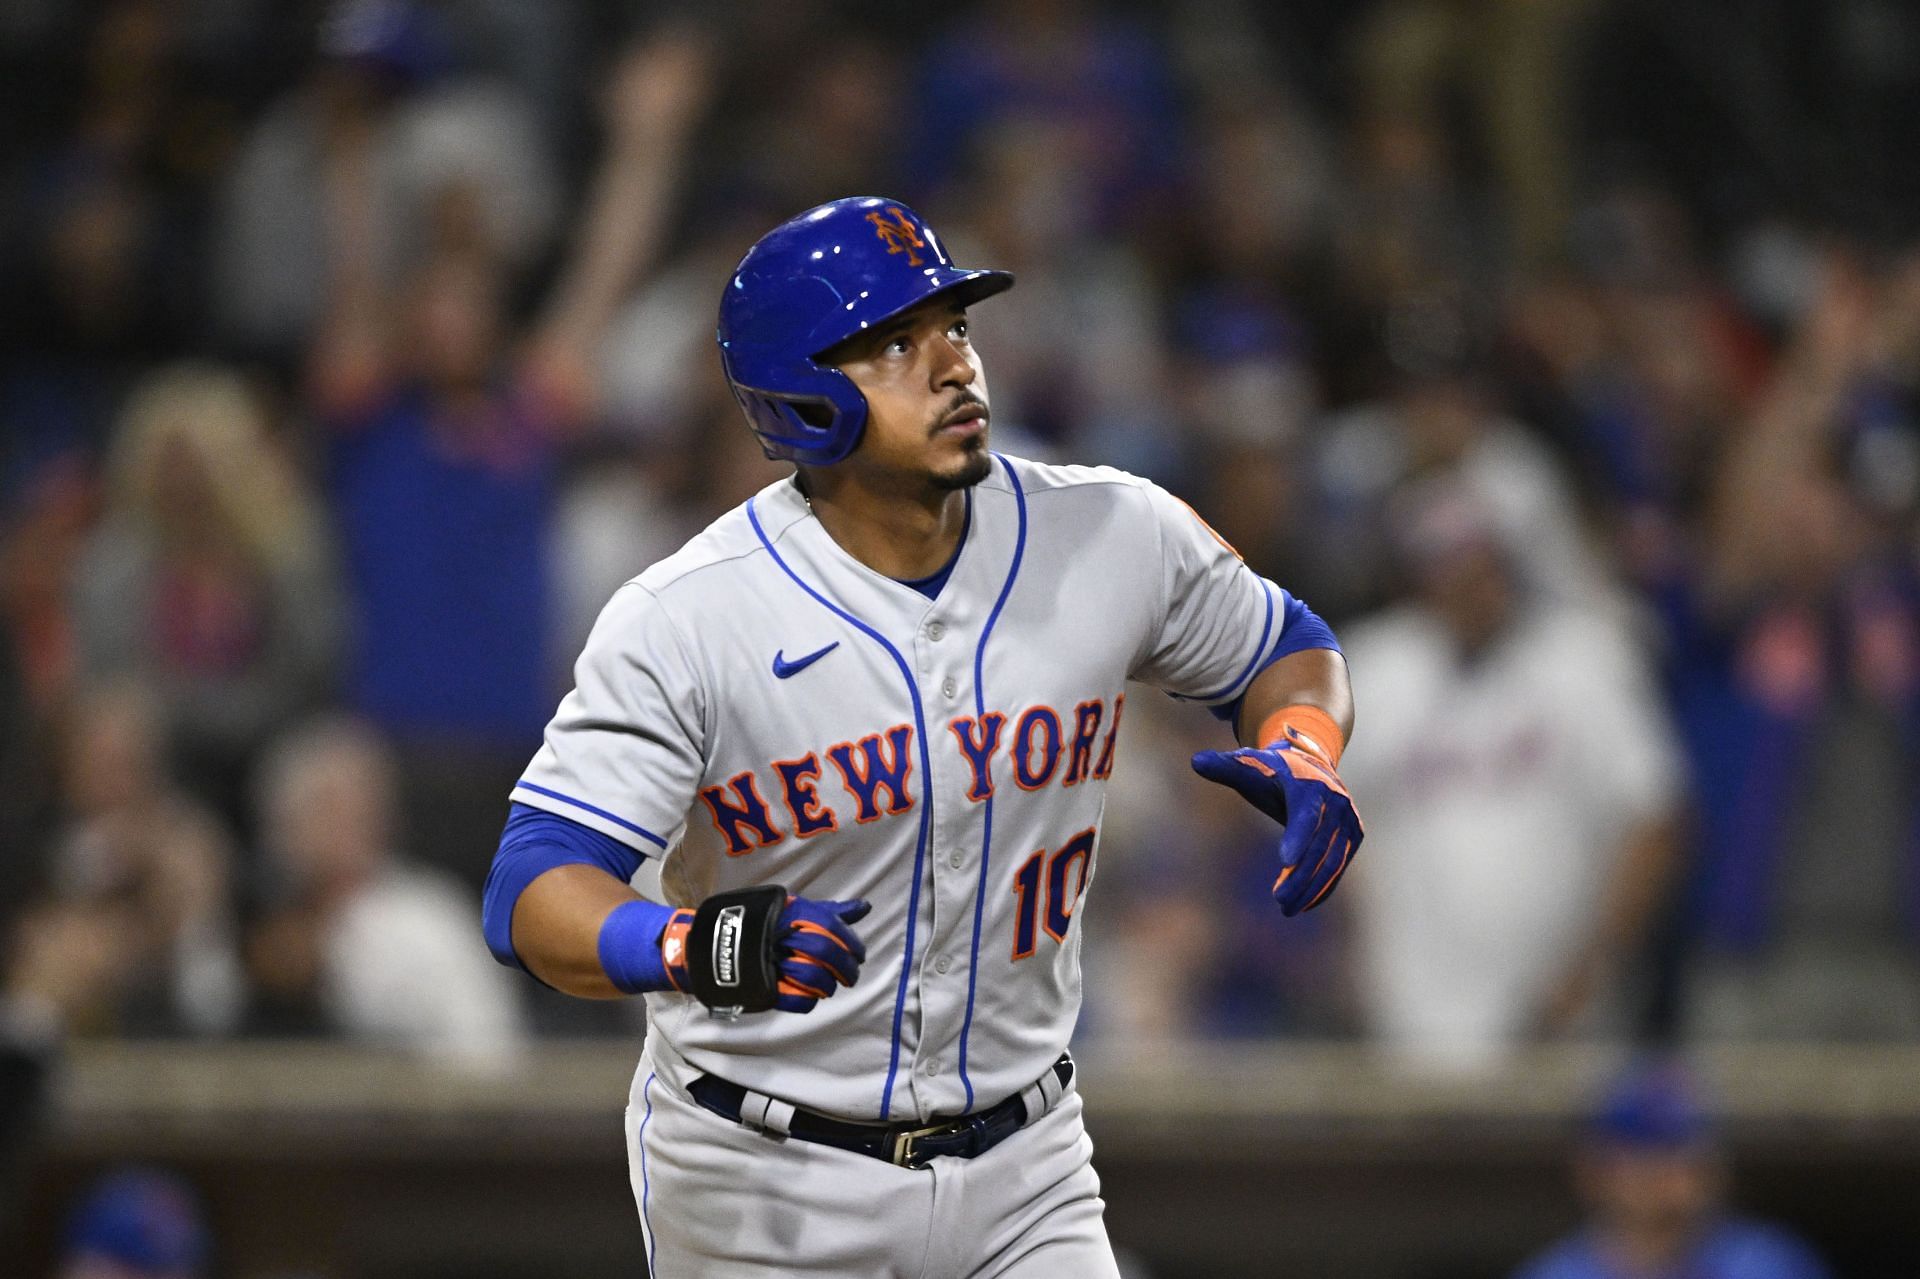 New York Mets infielder Eduardo Escobar told his fanbase that he was going to turn things around soon.